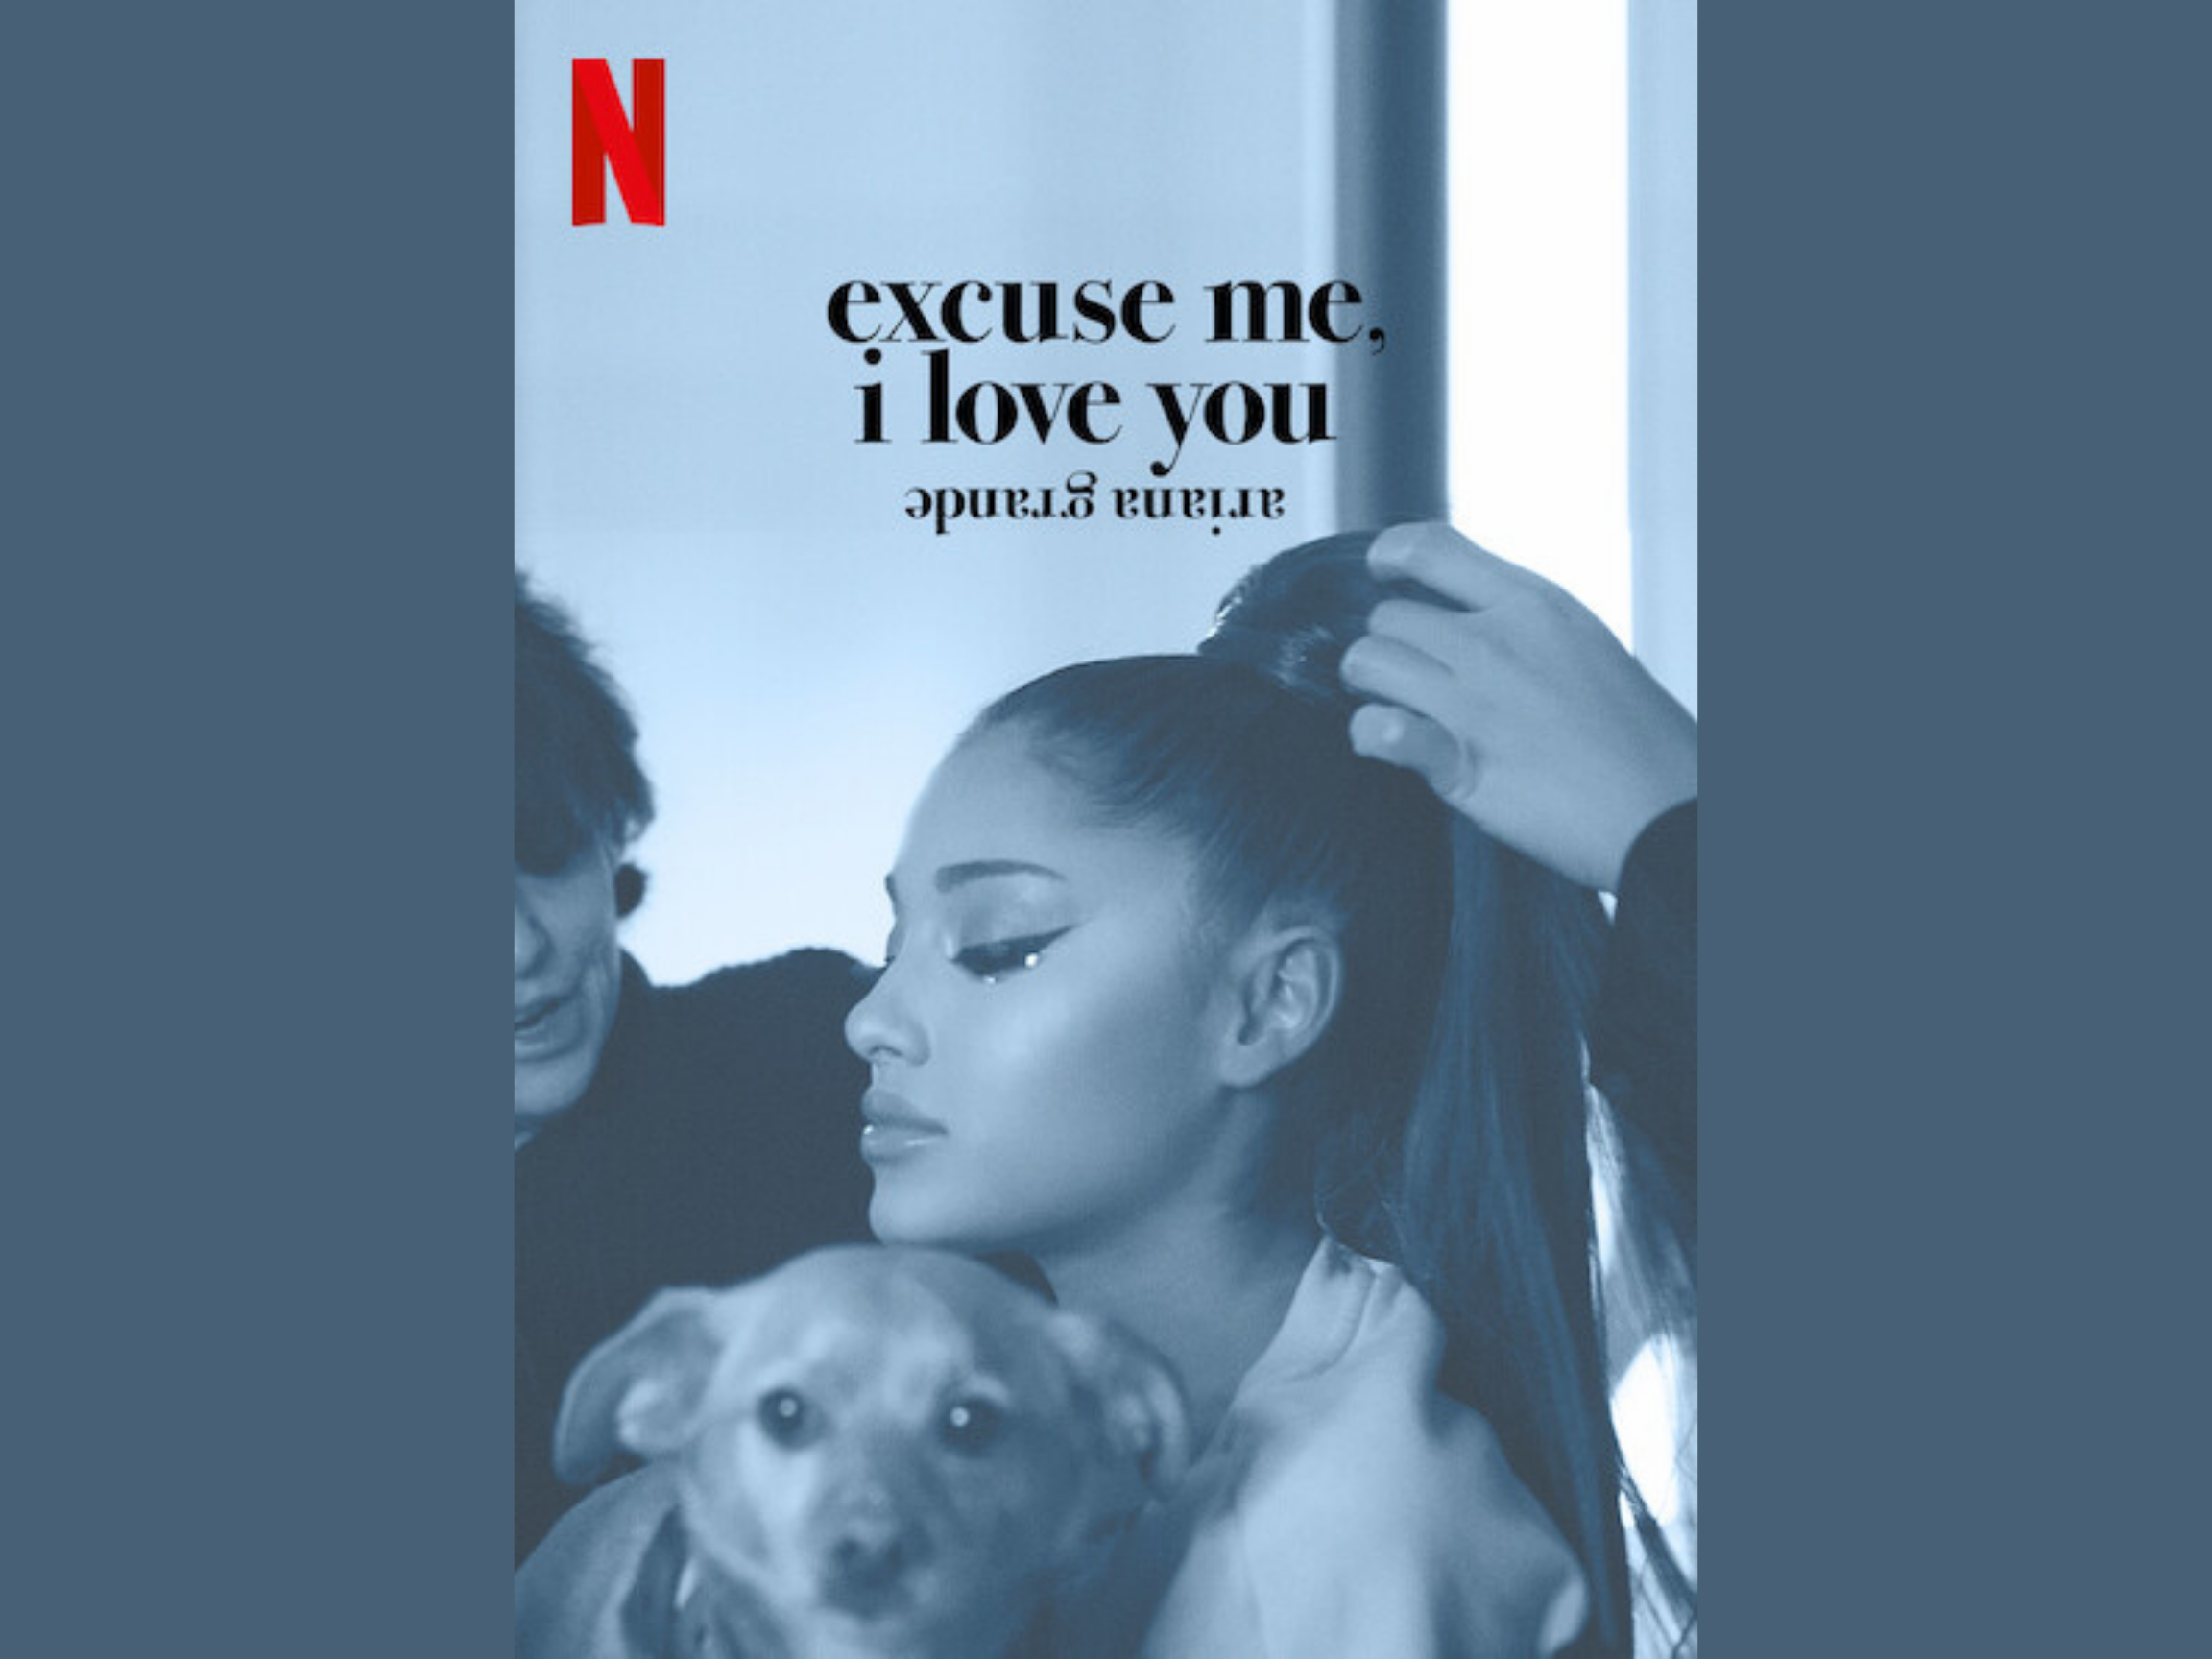 Ariana Grande's 'excuse Me, I Love You' Captures The Hearts Of Long Time Enthusiasts. The Stanford Daily